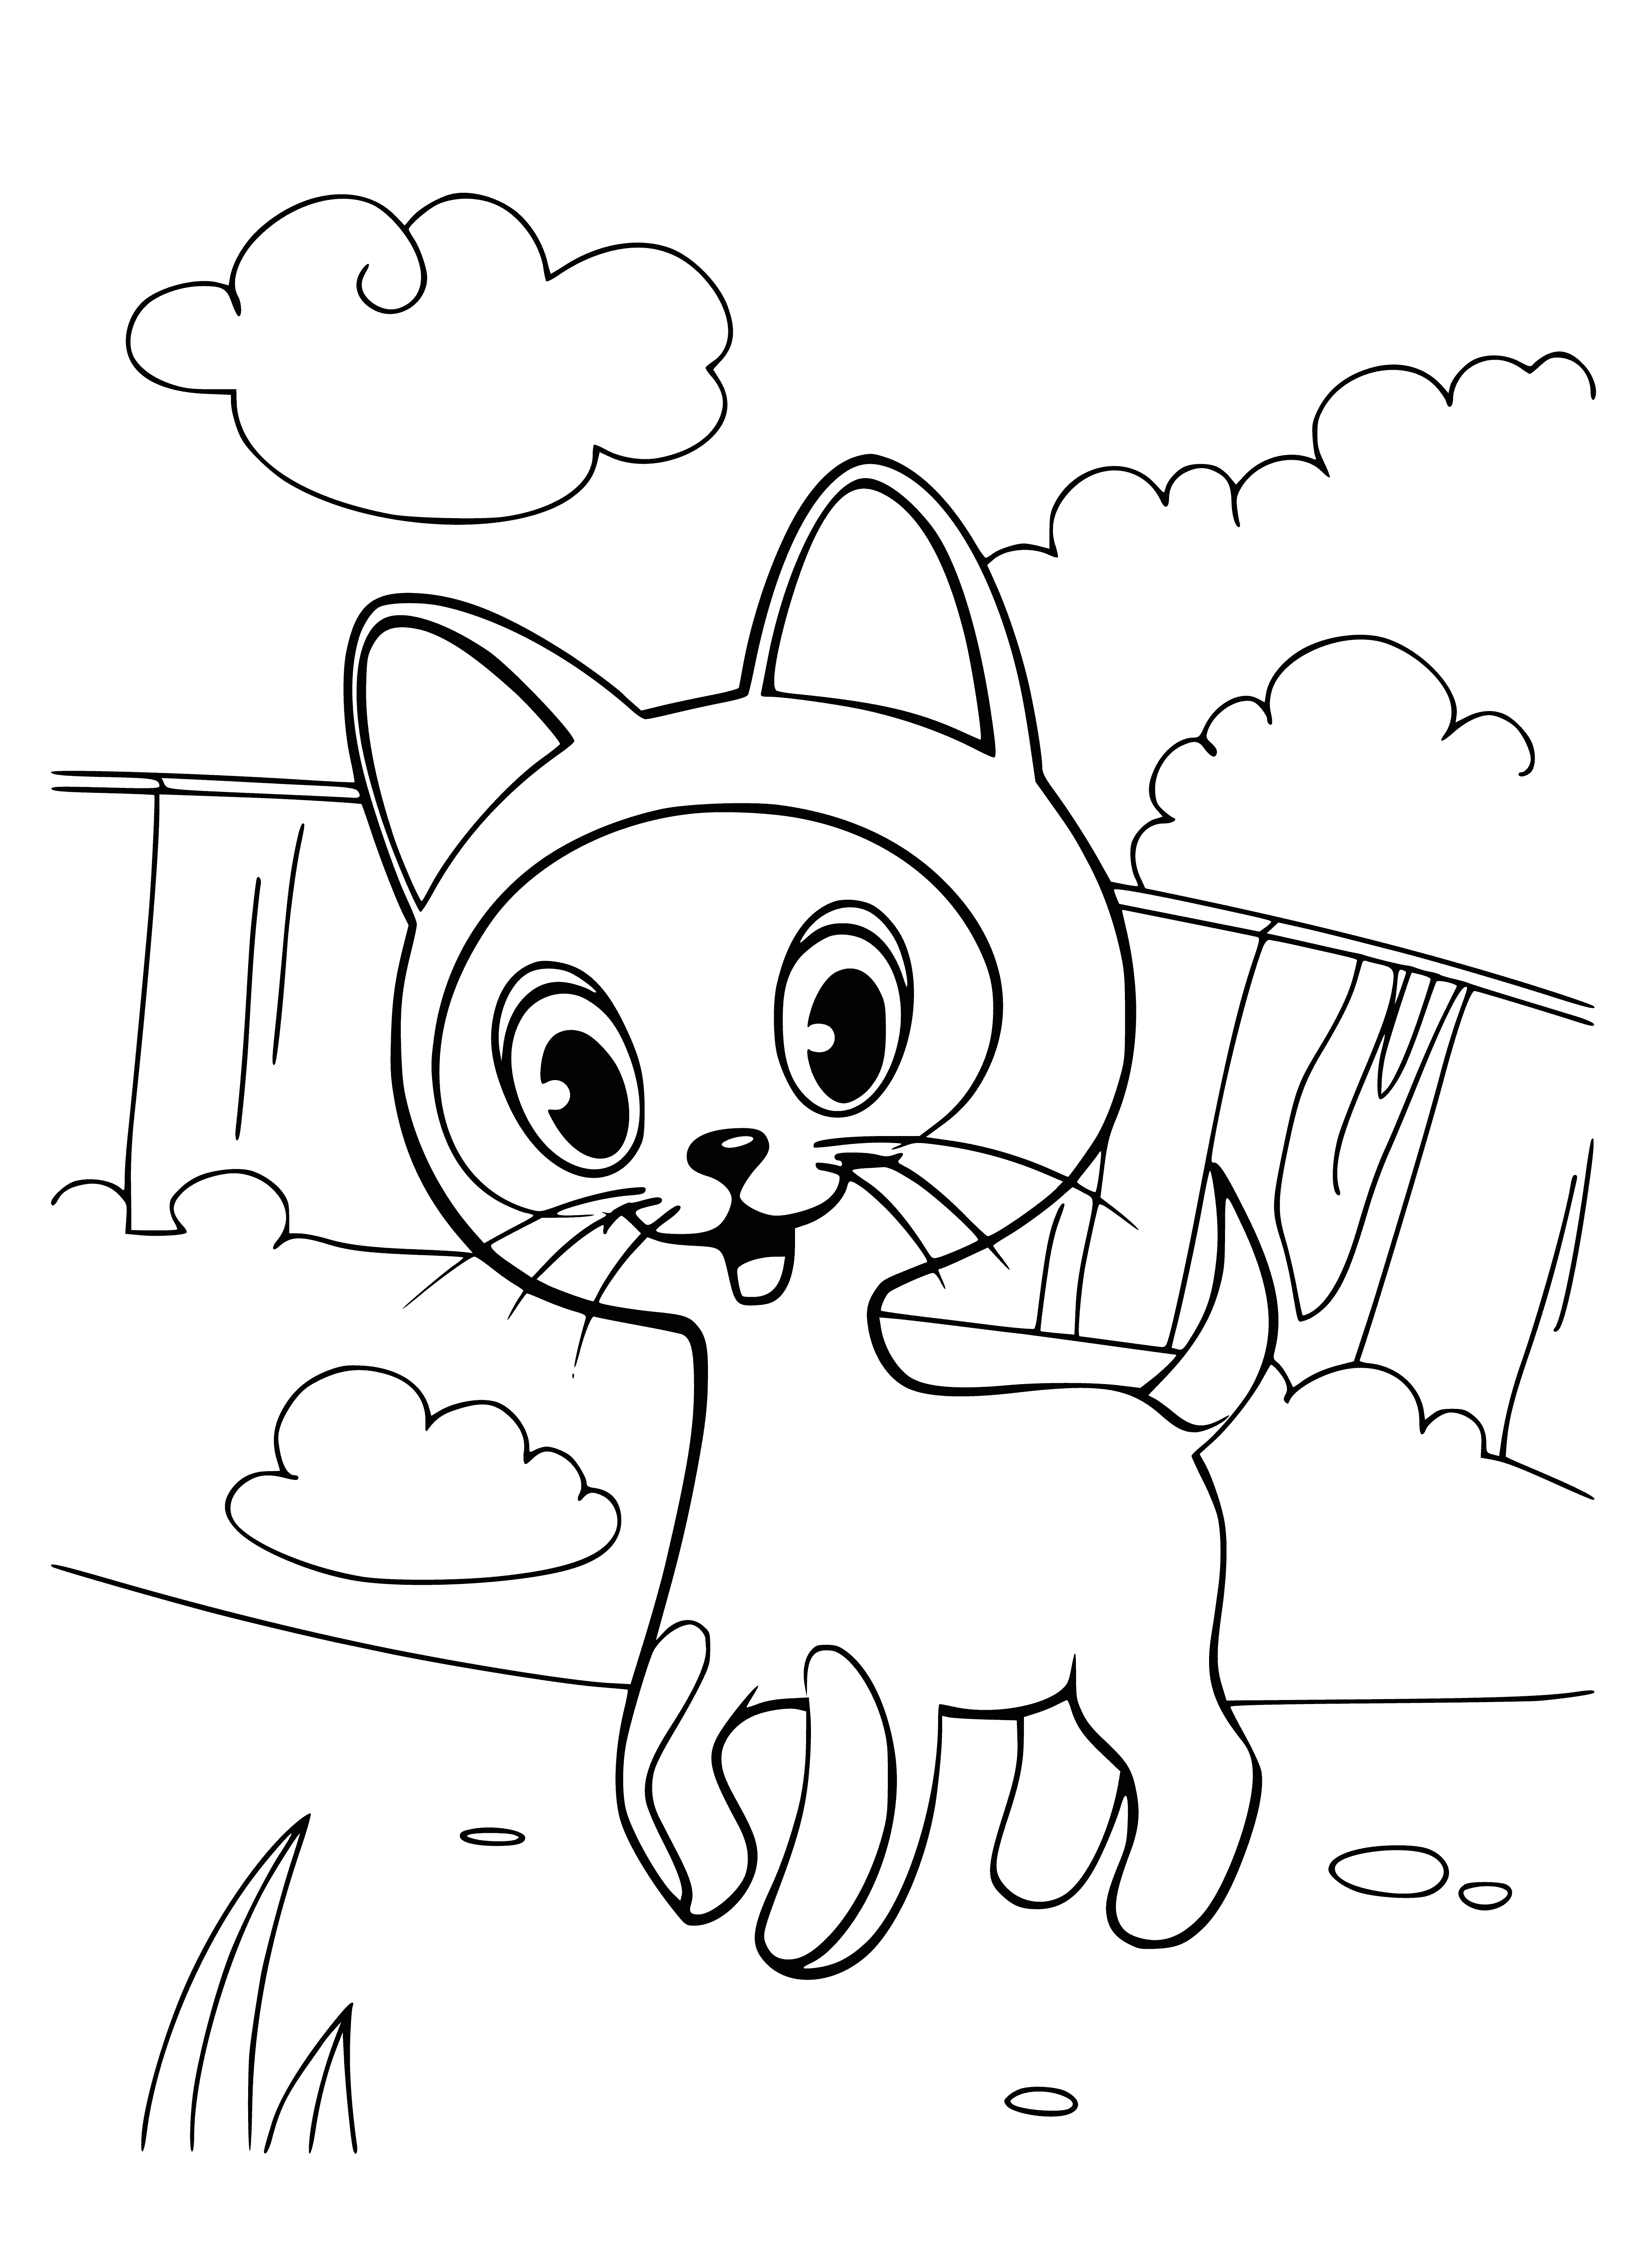 coloring page: Tabby kitten sits on a patch of grass, round face with big ears and bright green eyes, looking away from viewer.